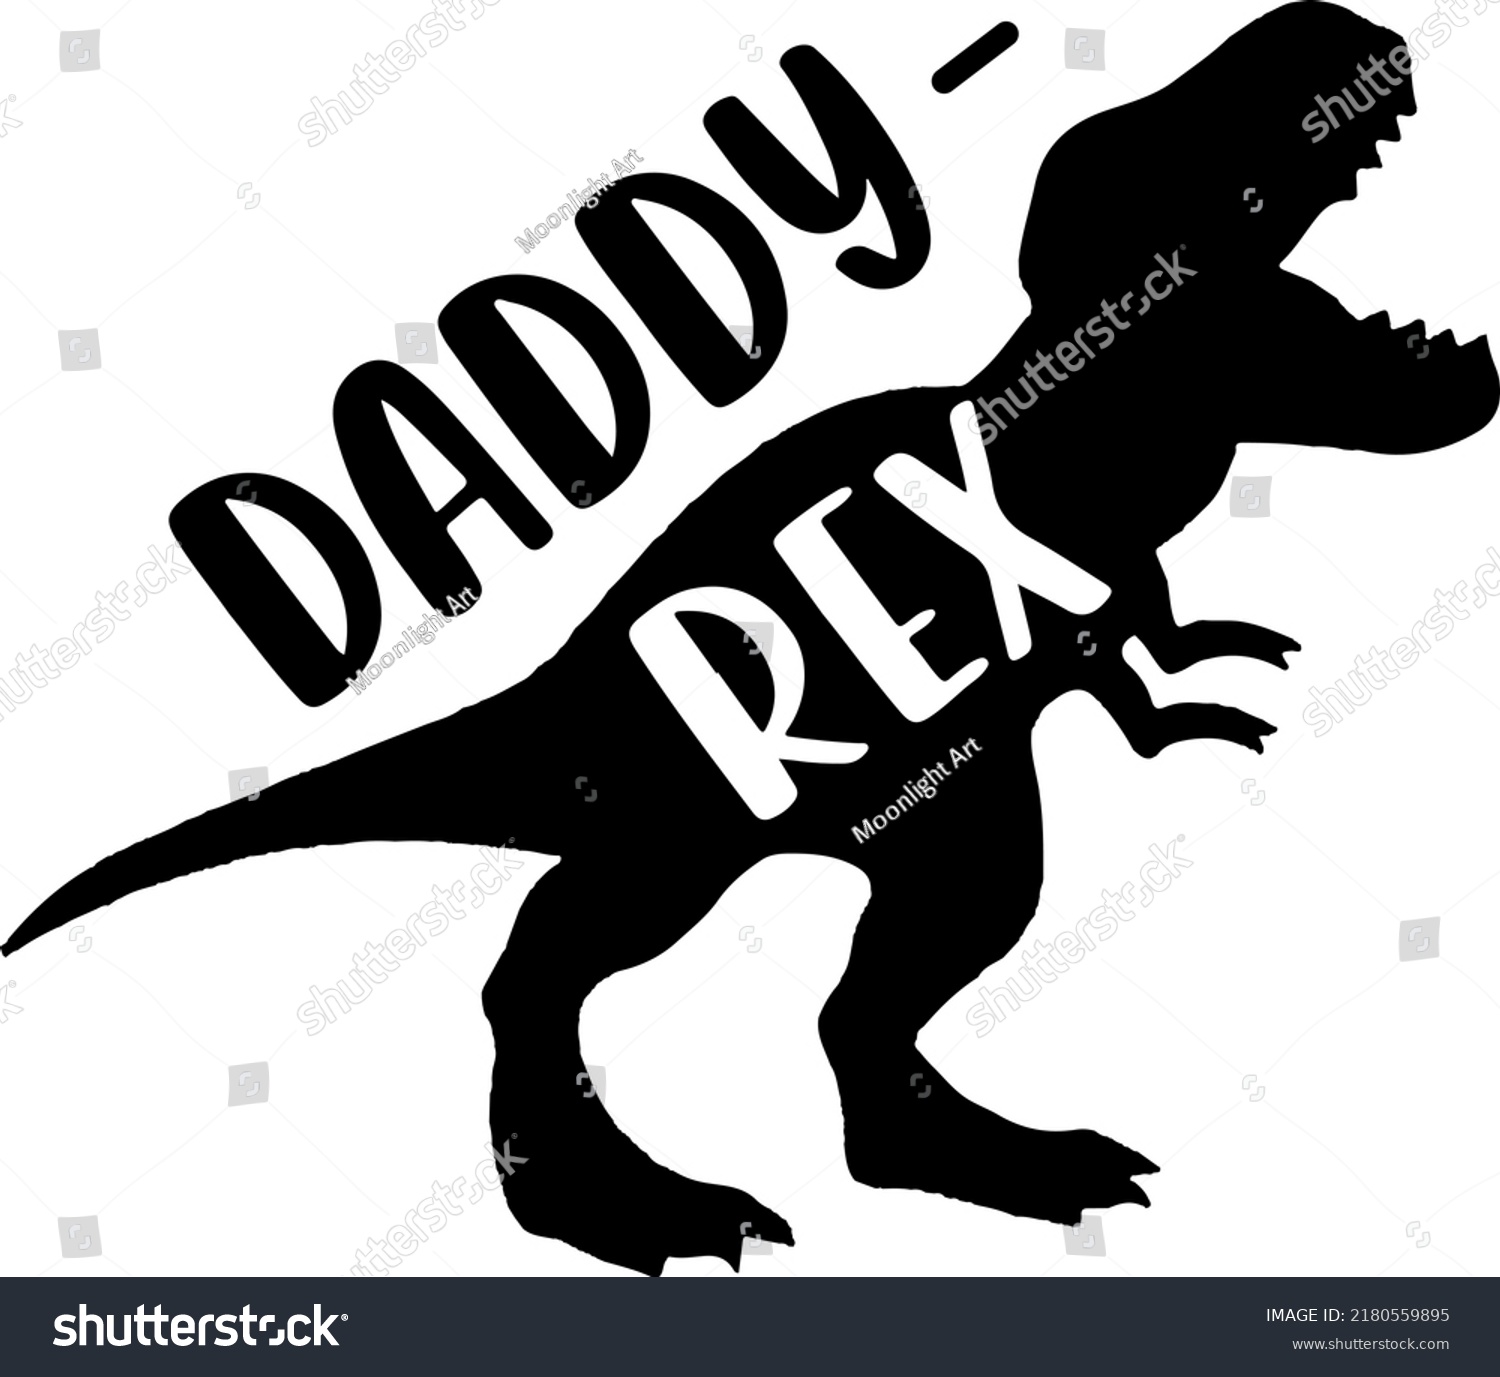 SVG of Daddy Rex Svg, Funny Shirt, Dinosaur, Kids, T-Rex, Fathers Day, Boy Shirt Svg, Dad Cut File for Cricut, Png, Dxf,  Daddysaurus, You'll get jurasskicked svg